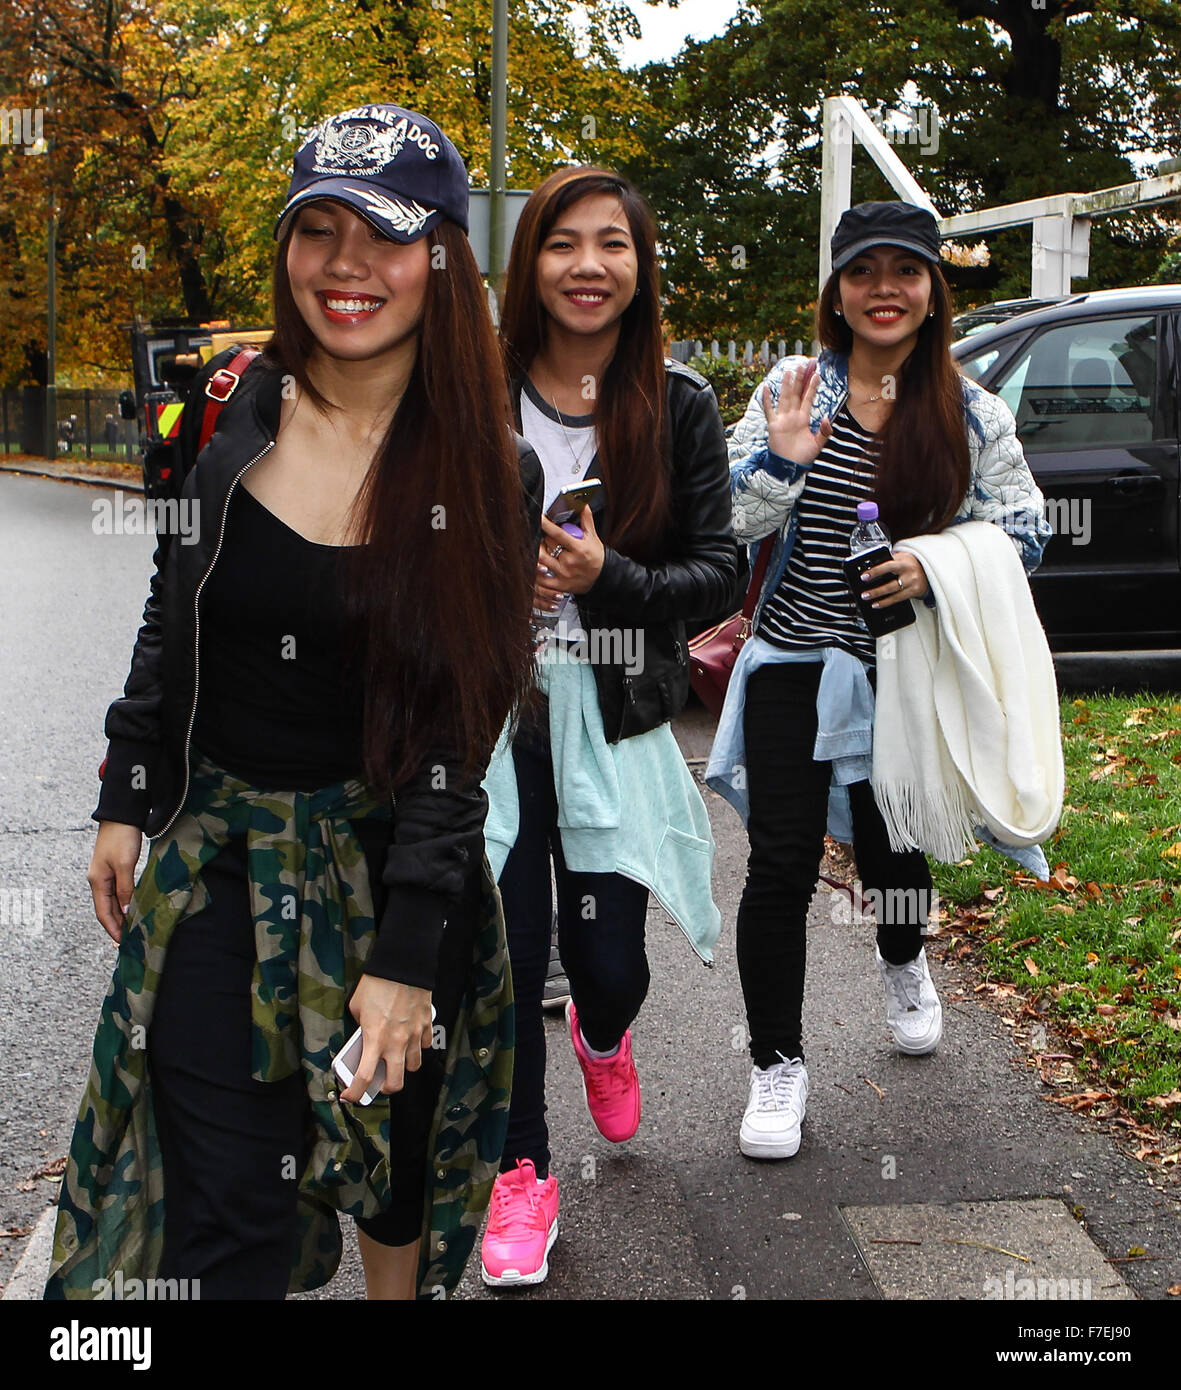 X Factor Contestants 4th Impact Arrive At Rehearsals For This